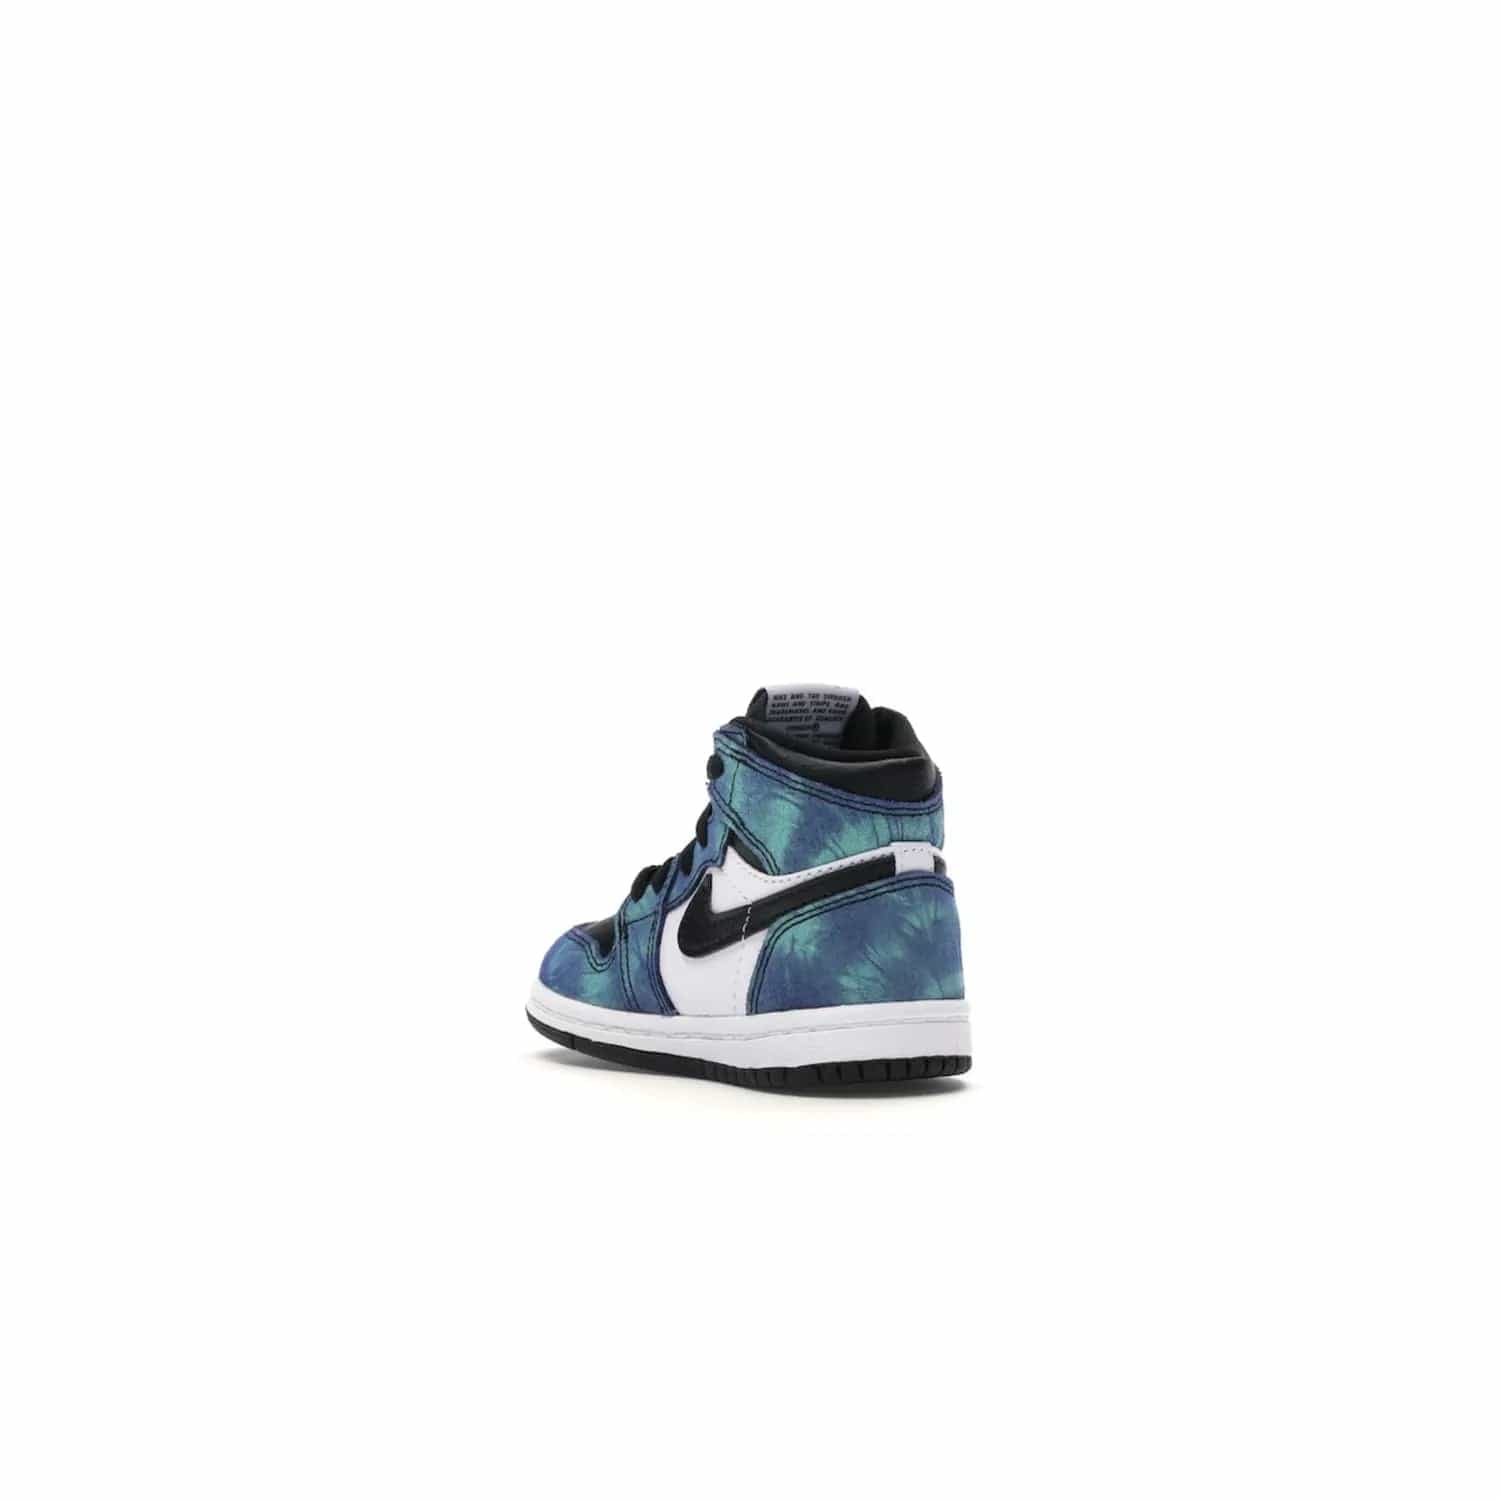 Jordan 1 Retro High Tie Dye (TD) - Image 24 - Only at www.BallersClubKickz.com - Add a unique twist to your sneaker collection with the Jordan 1 Retro High Tie Dye (TD). Classic Air Jordan 1 details like toe box perforations and the signature Swoosh logo on the sidewall are topped with an eye-catching tie dye design that’s perfect for styling all year round.